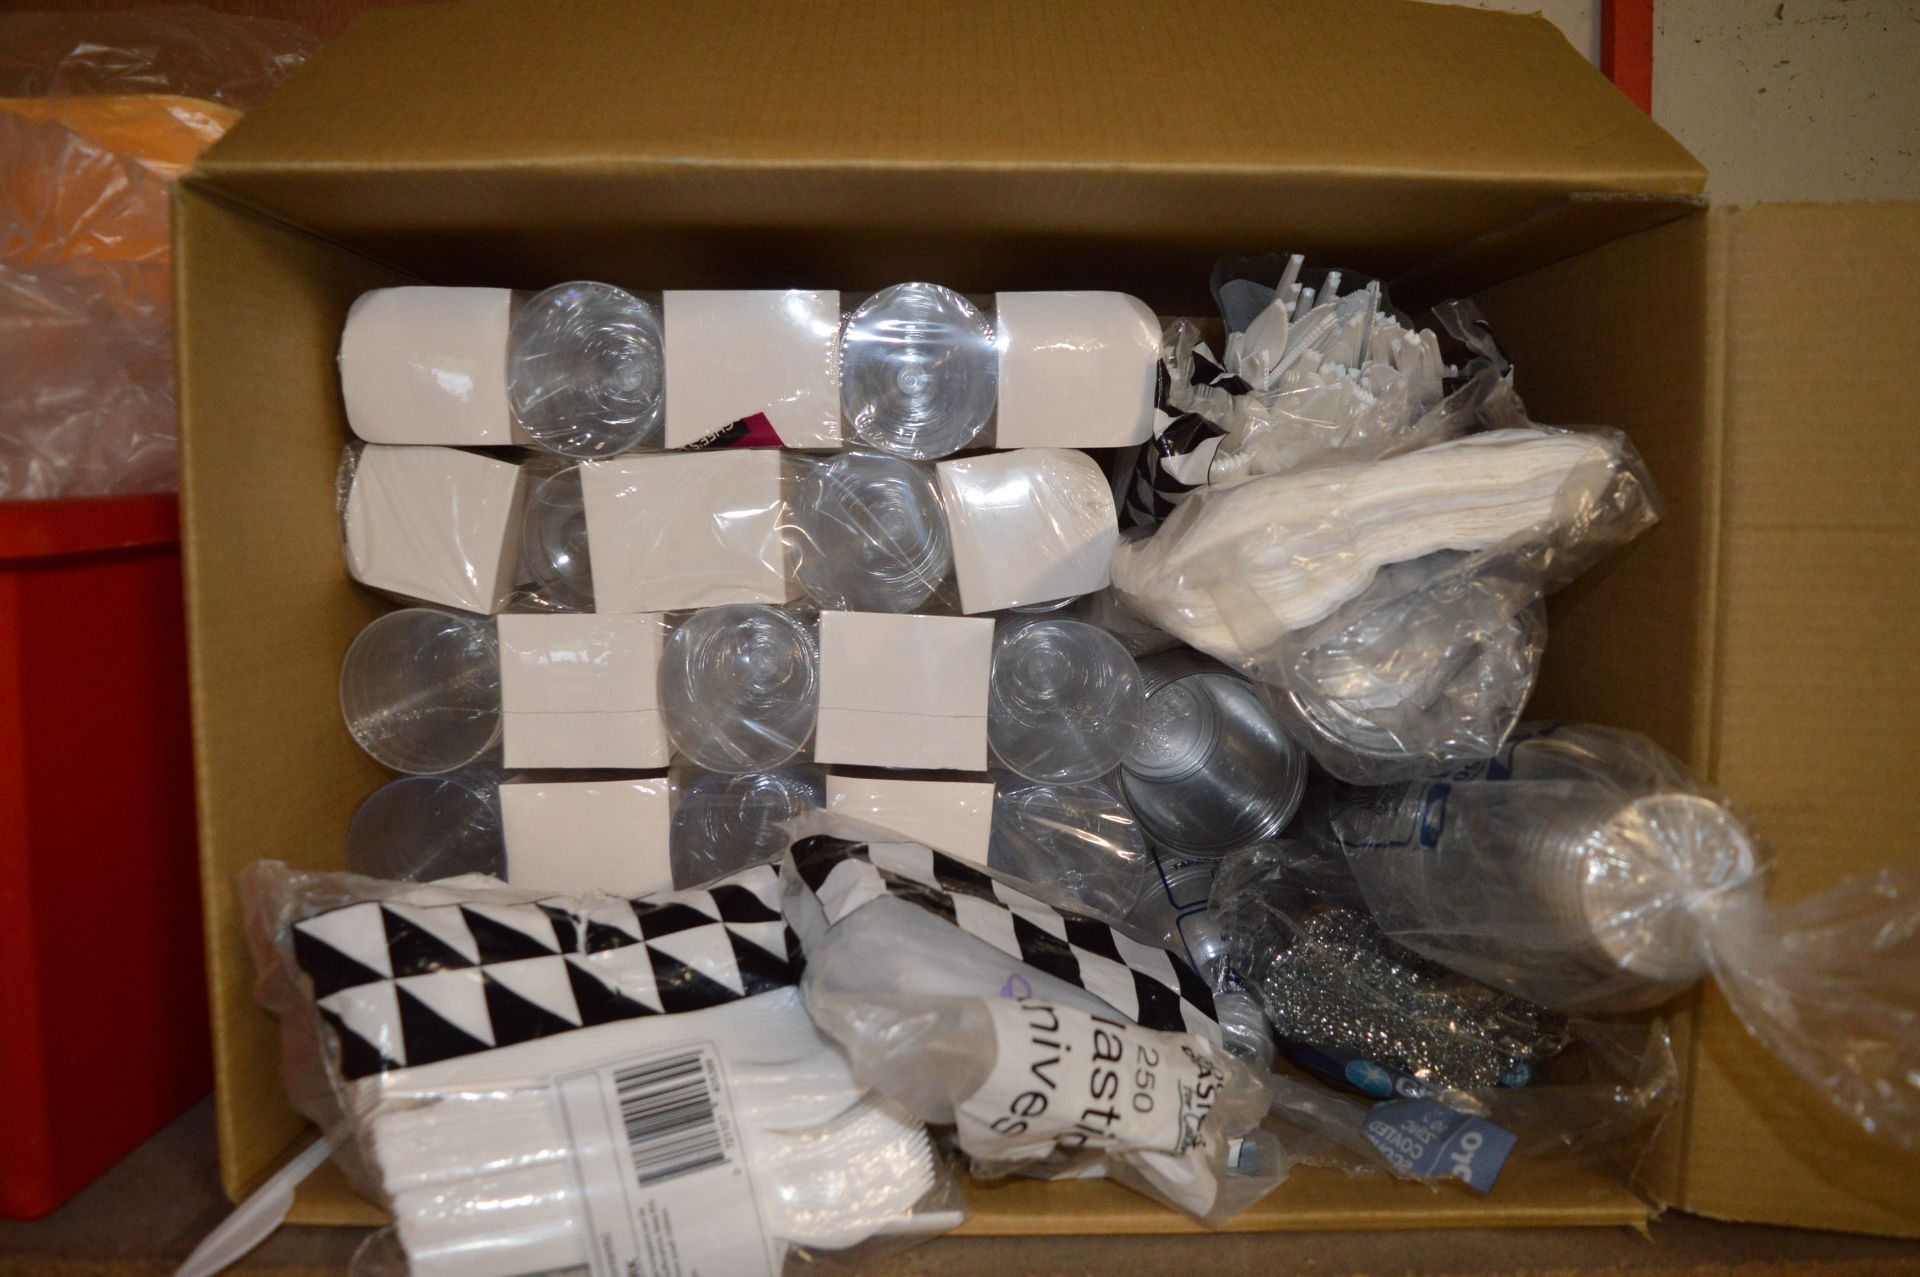 Contents of Shelf to Include Takeaway Boxes, Cups, - Image 3 of 3